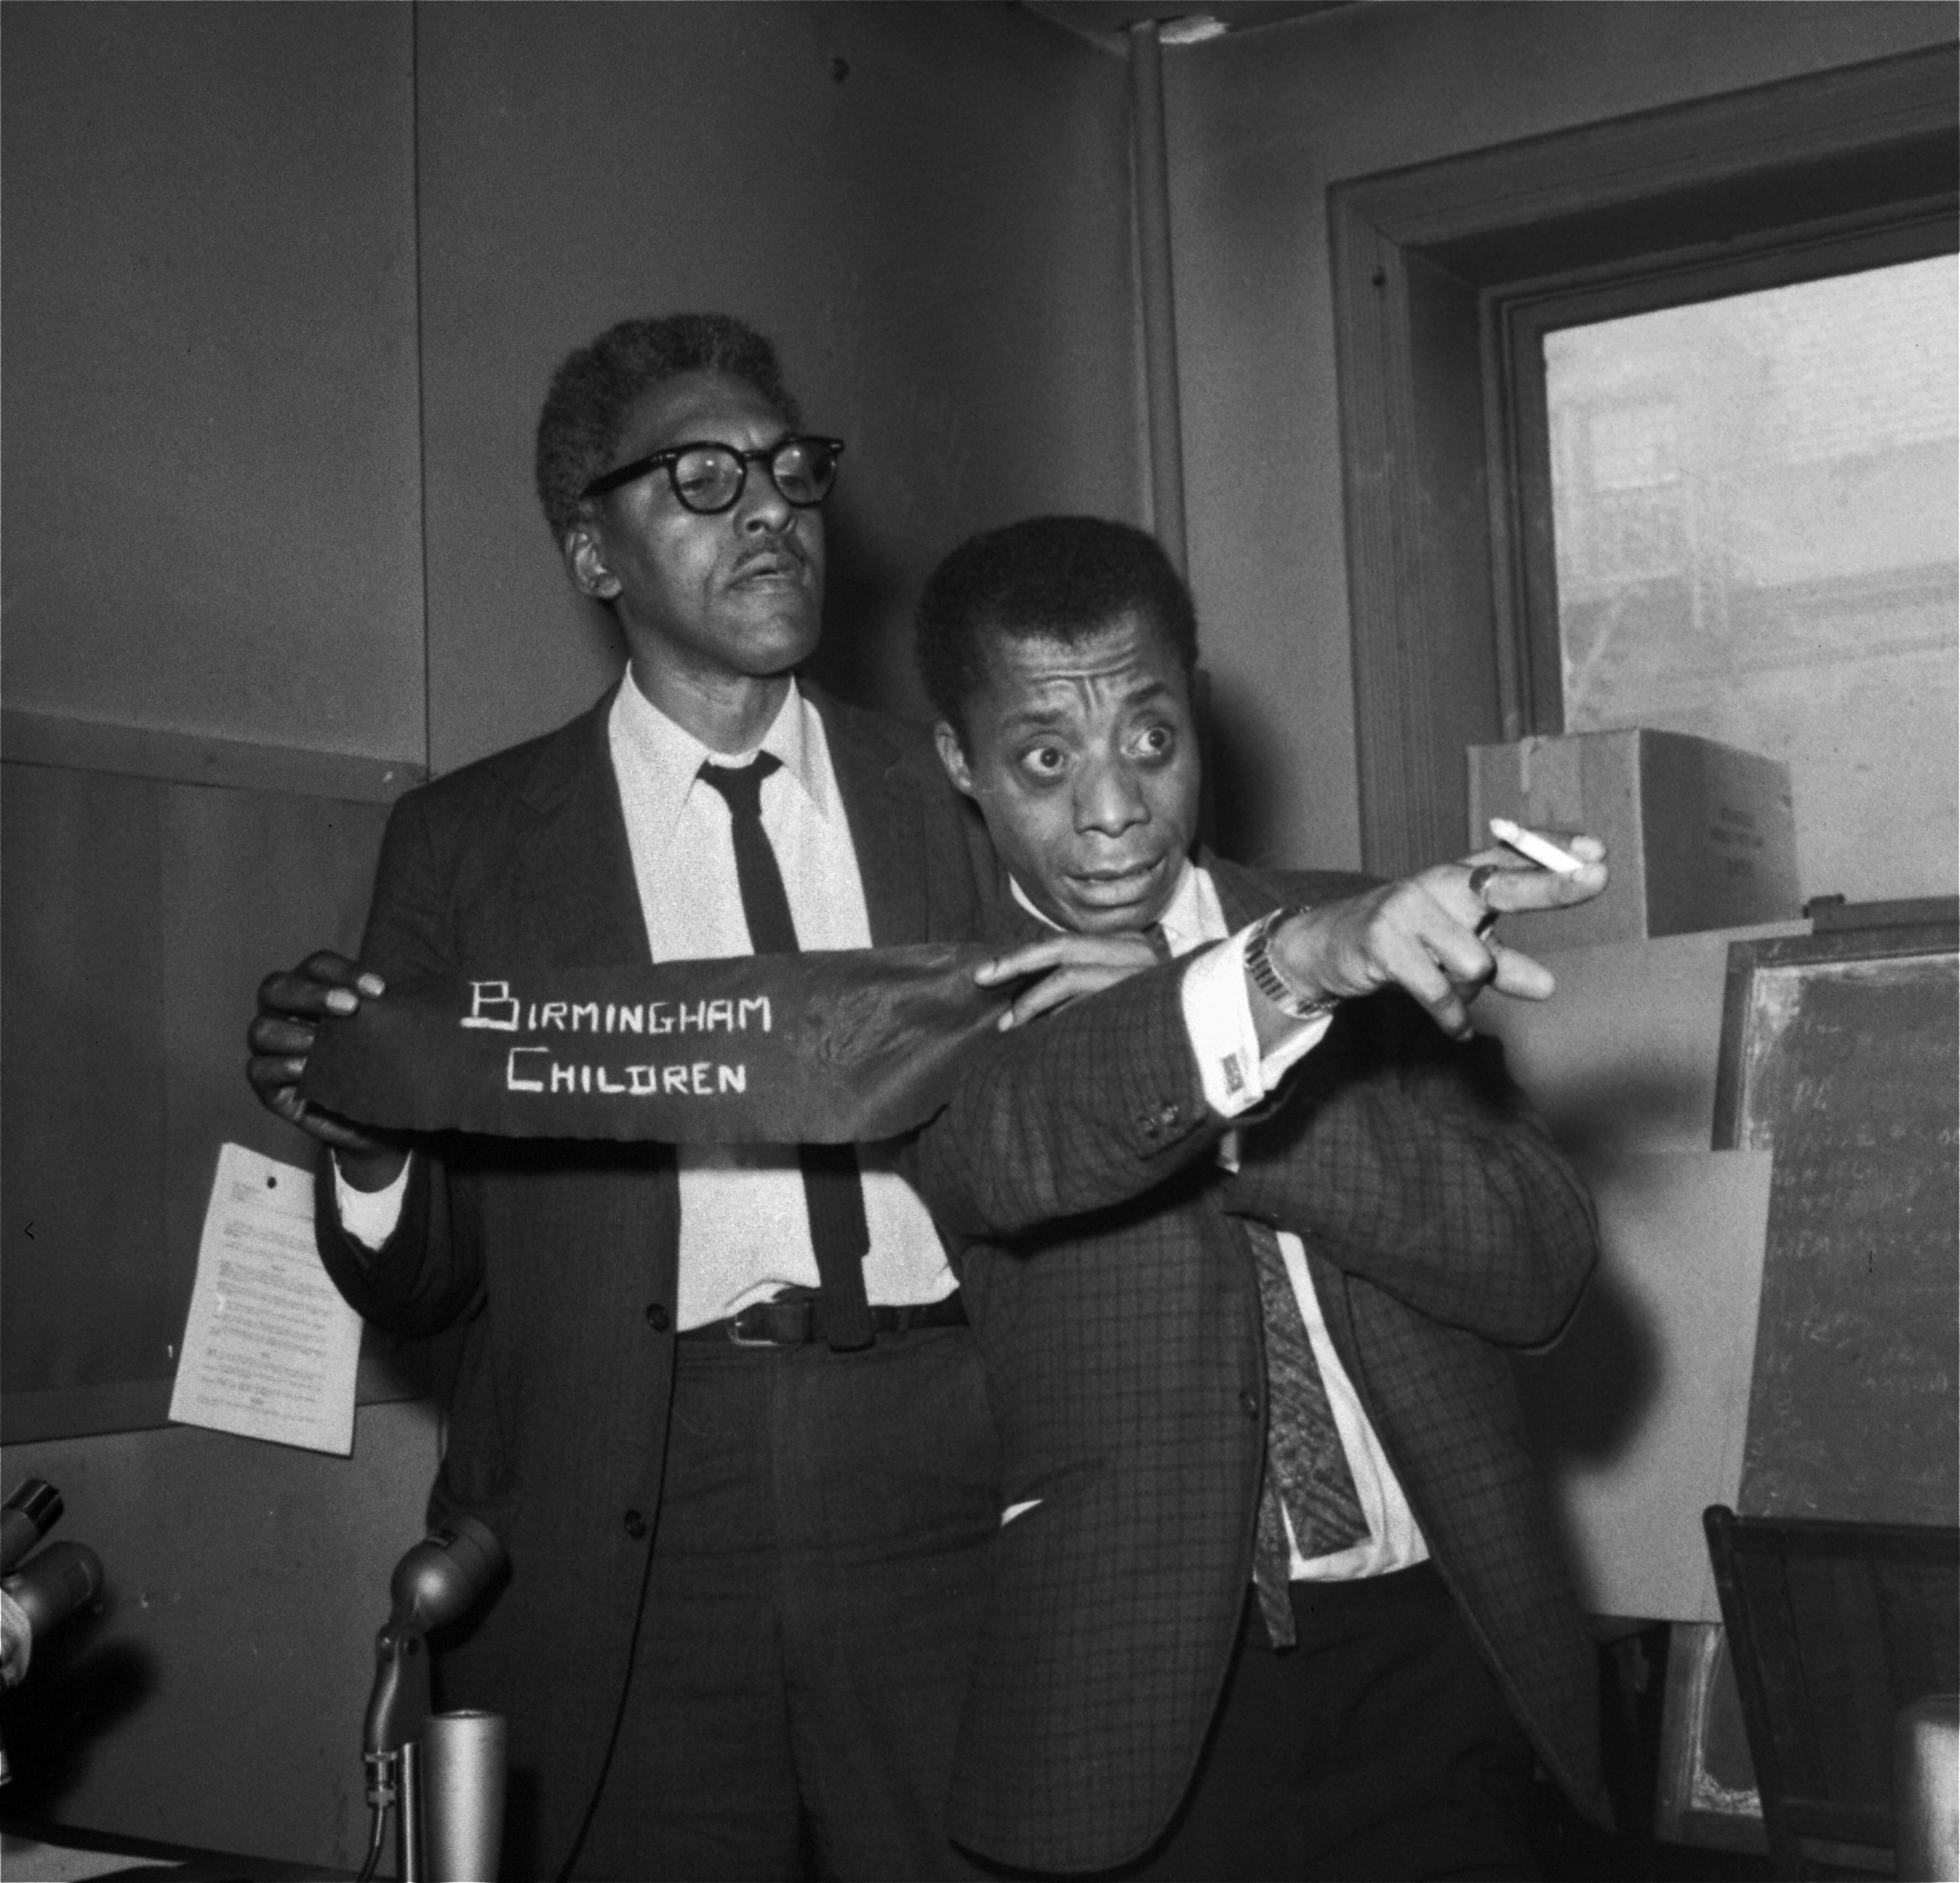 James Baldwin, right, and Bayard Rustin, deputy director of the March on Washington, discussing the 16th Street Baptist Church bombing that killed four young African-American girls in Birmingham, Ala., during a news conference in New York three days later, on Sept. 18, 1963. Rustin is holding an armband that people would be wearing at an upcoming rally organized as a day of mourning for the victims. (AP)